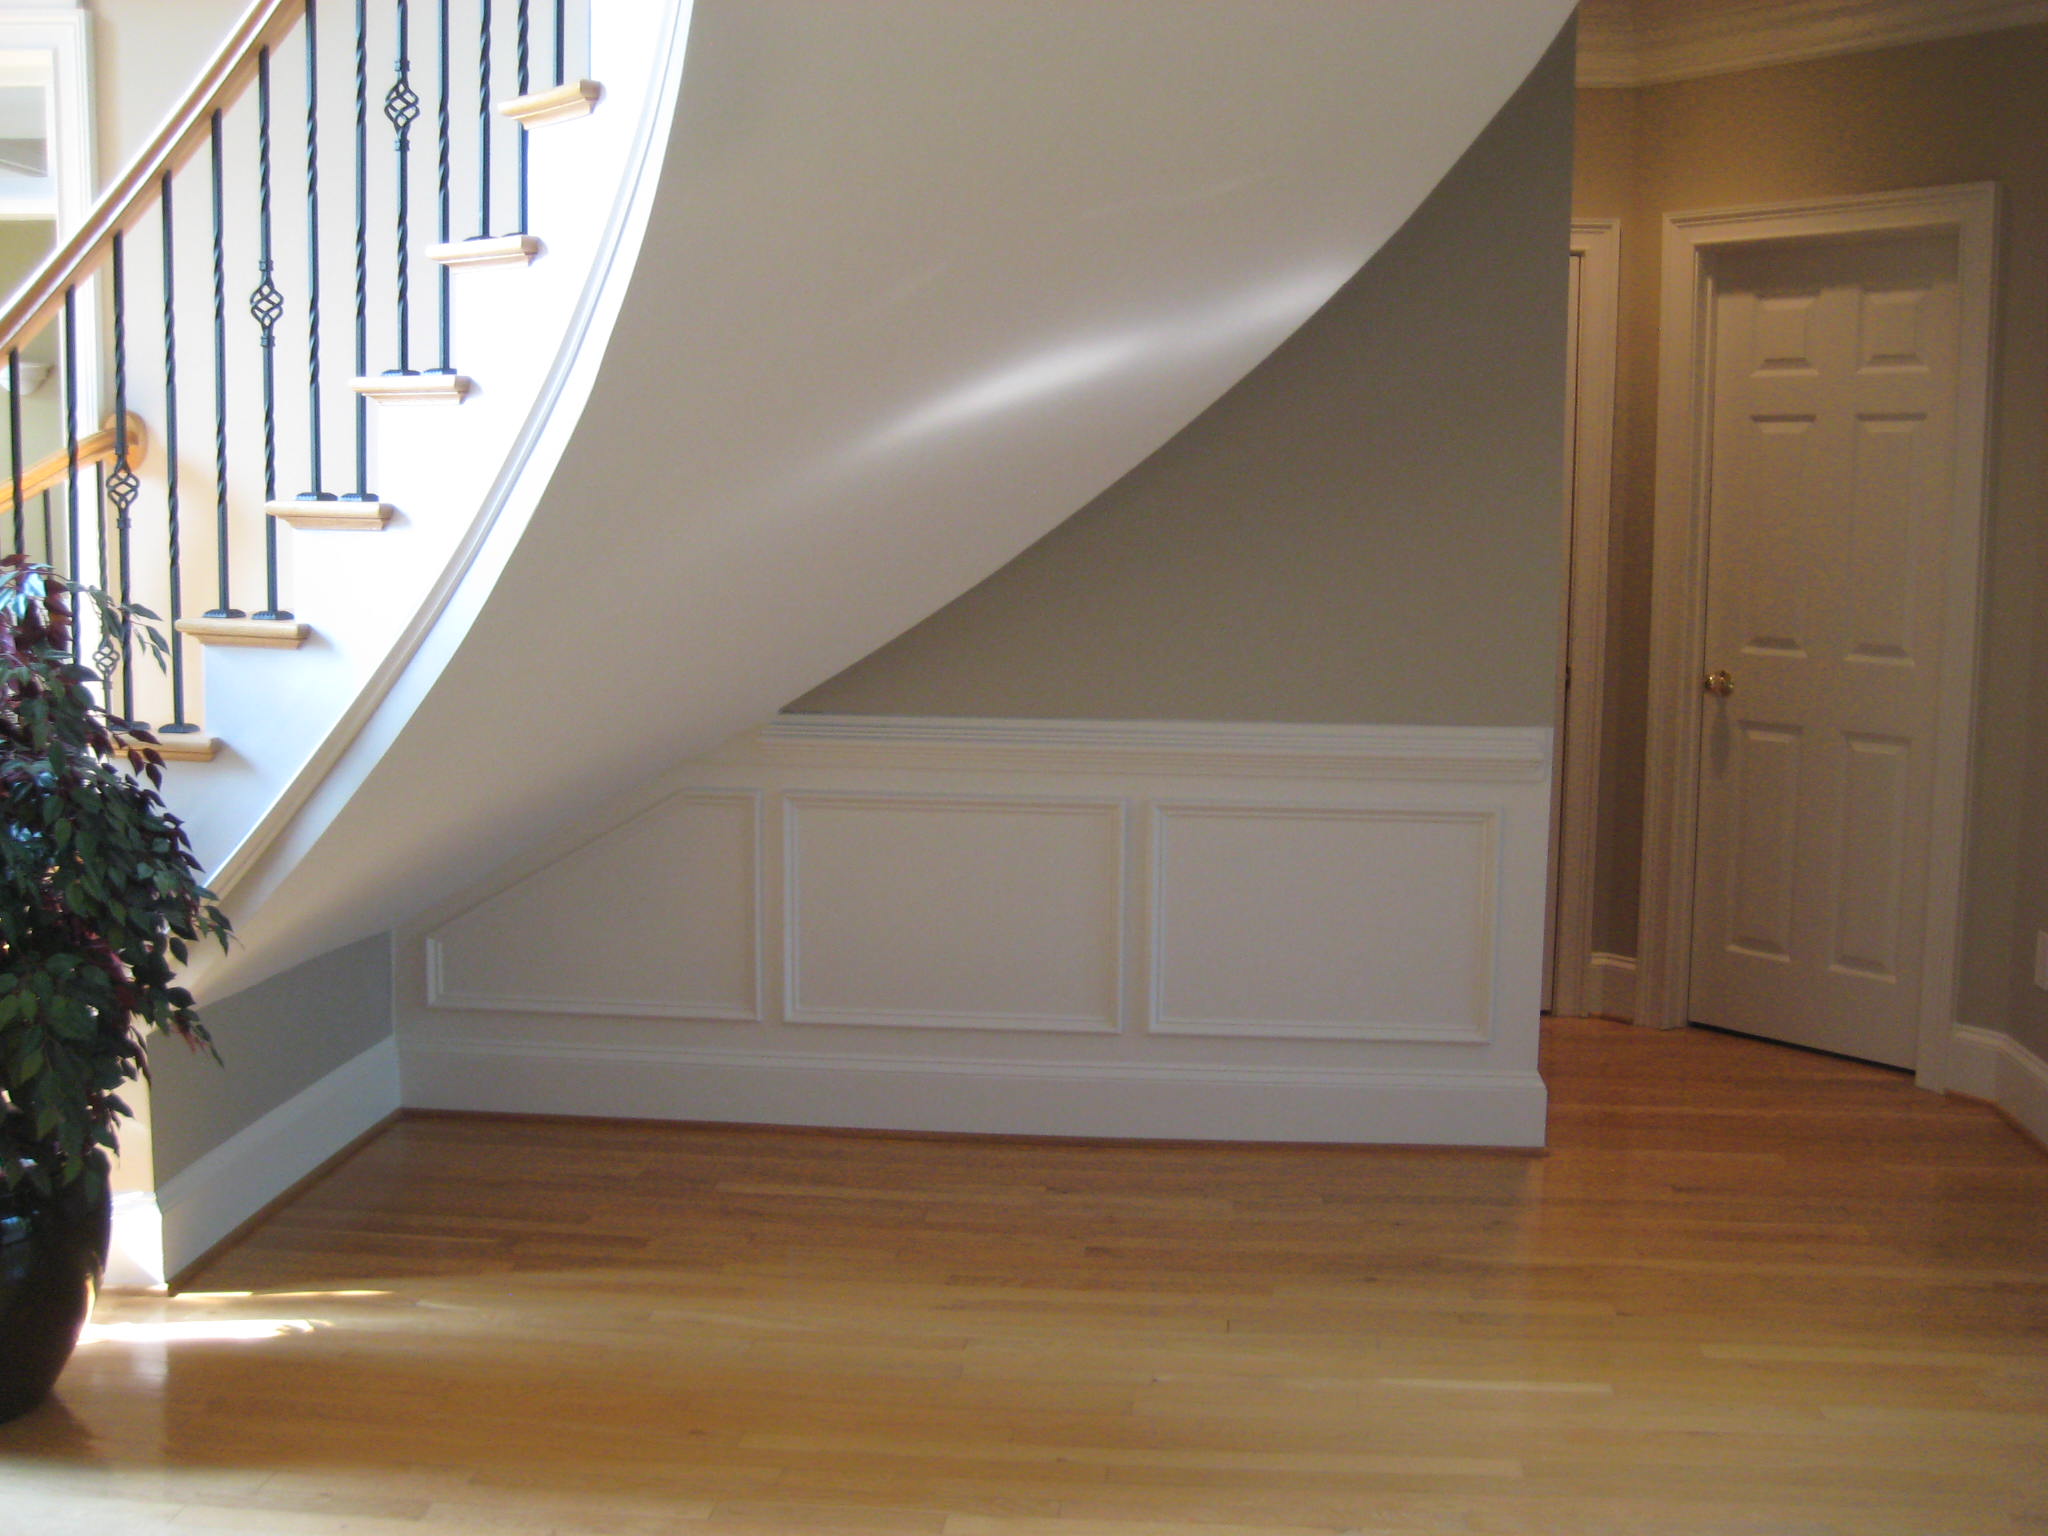 Beautifying staircase with additional wains coating and more.